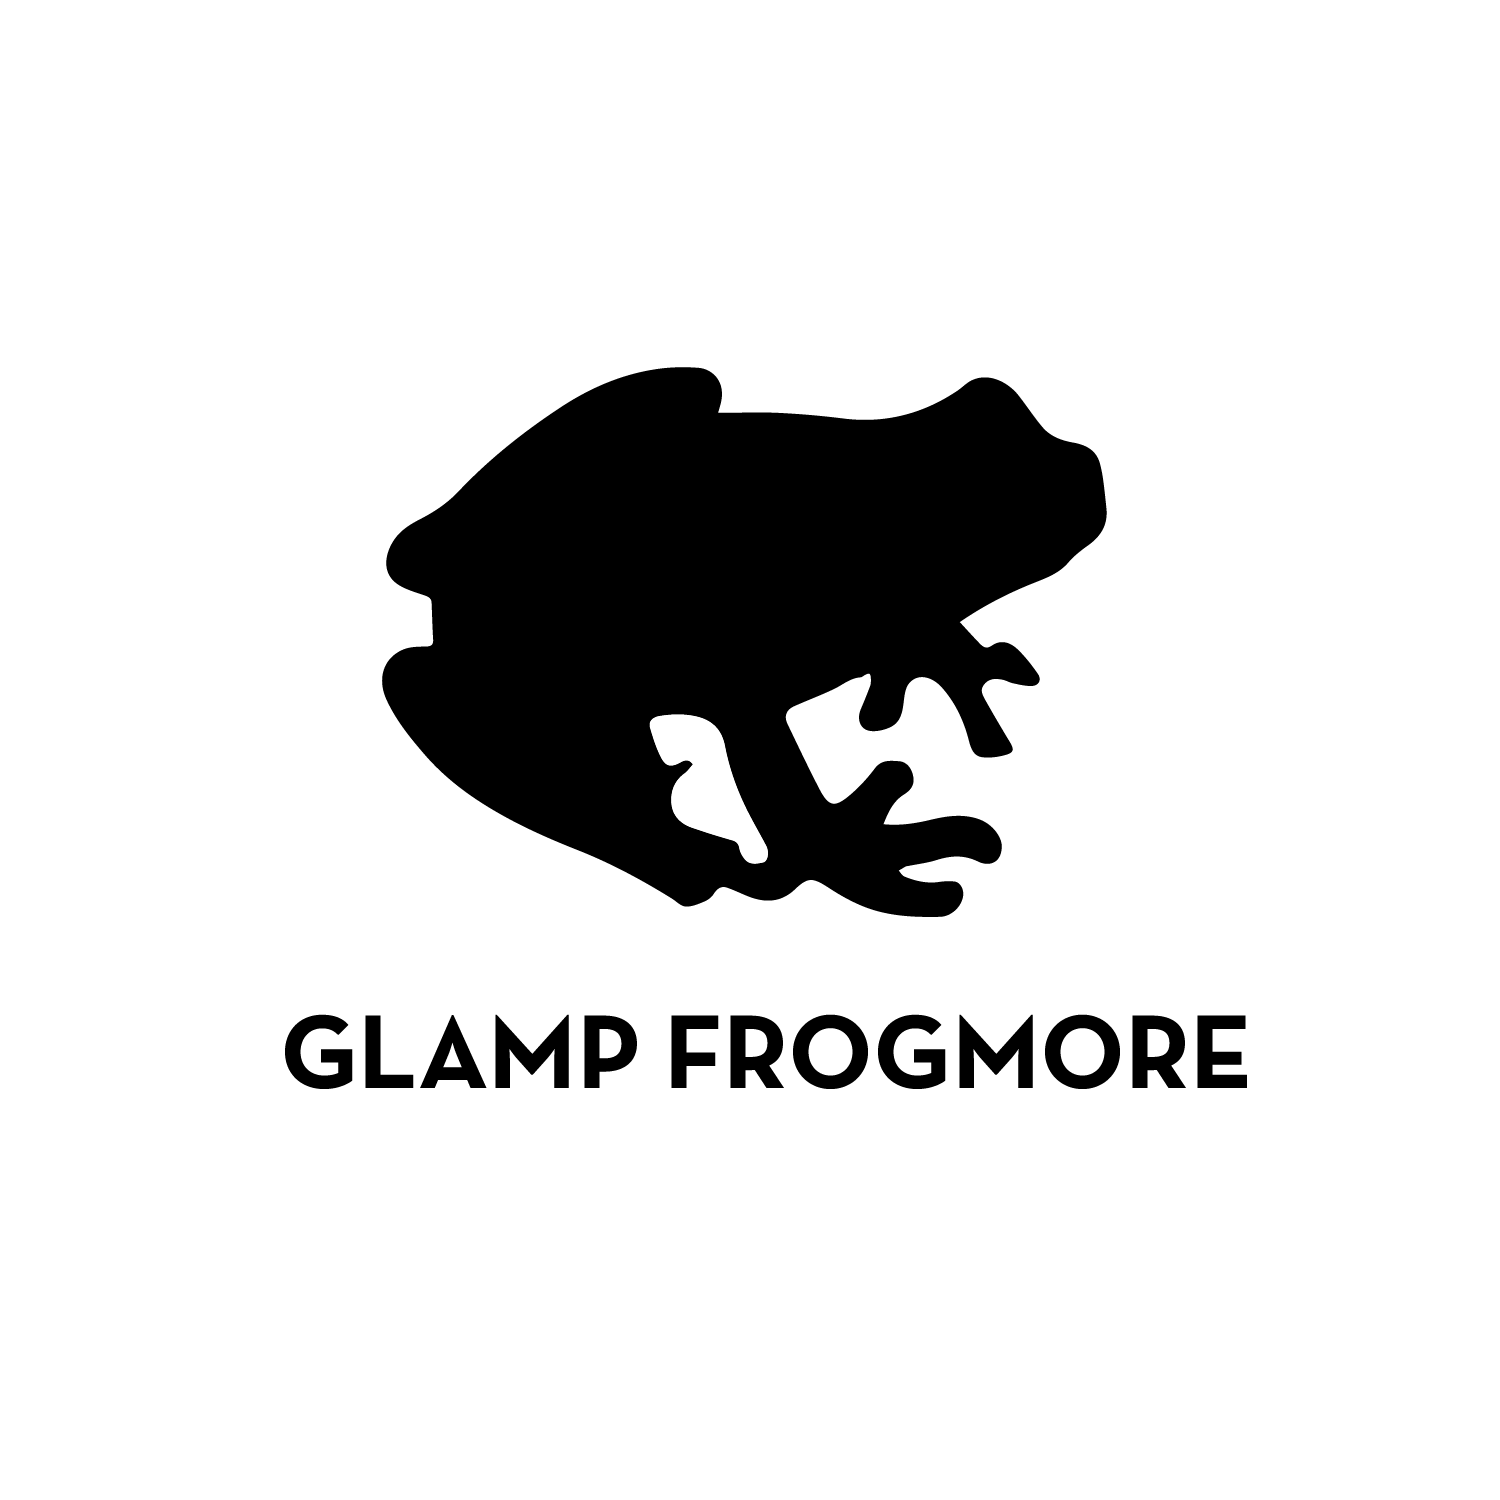 Glamp Frogmore